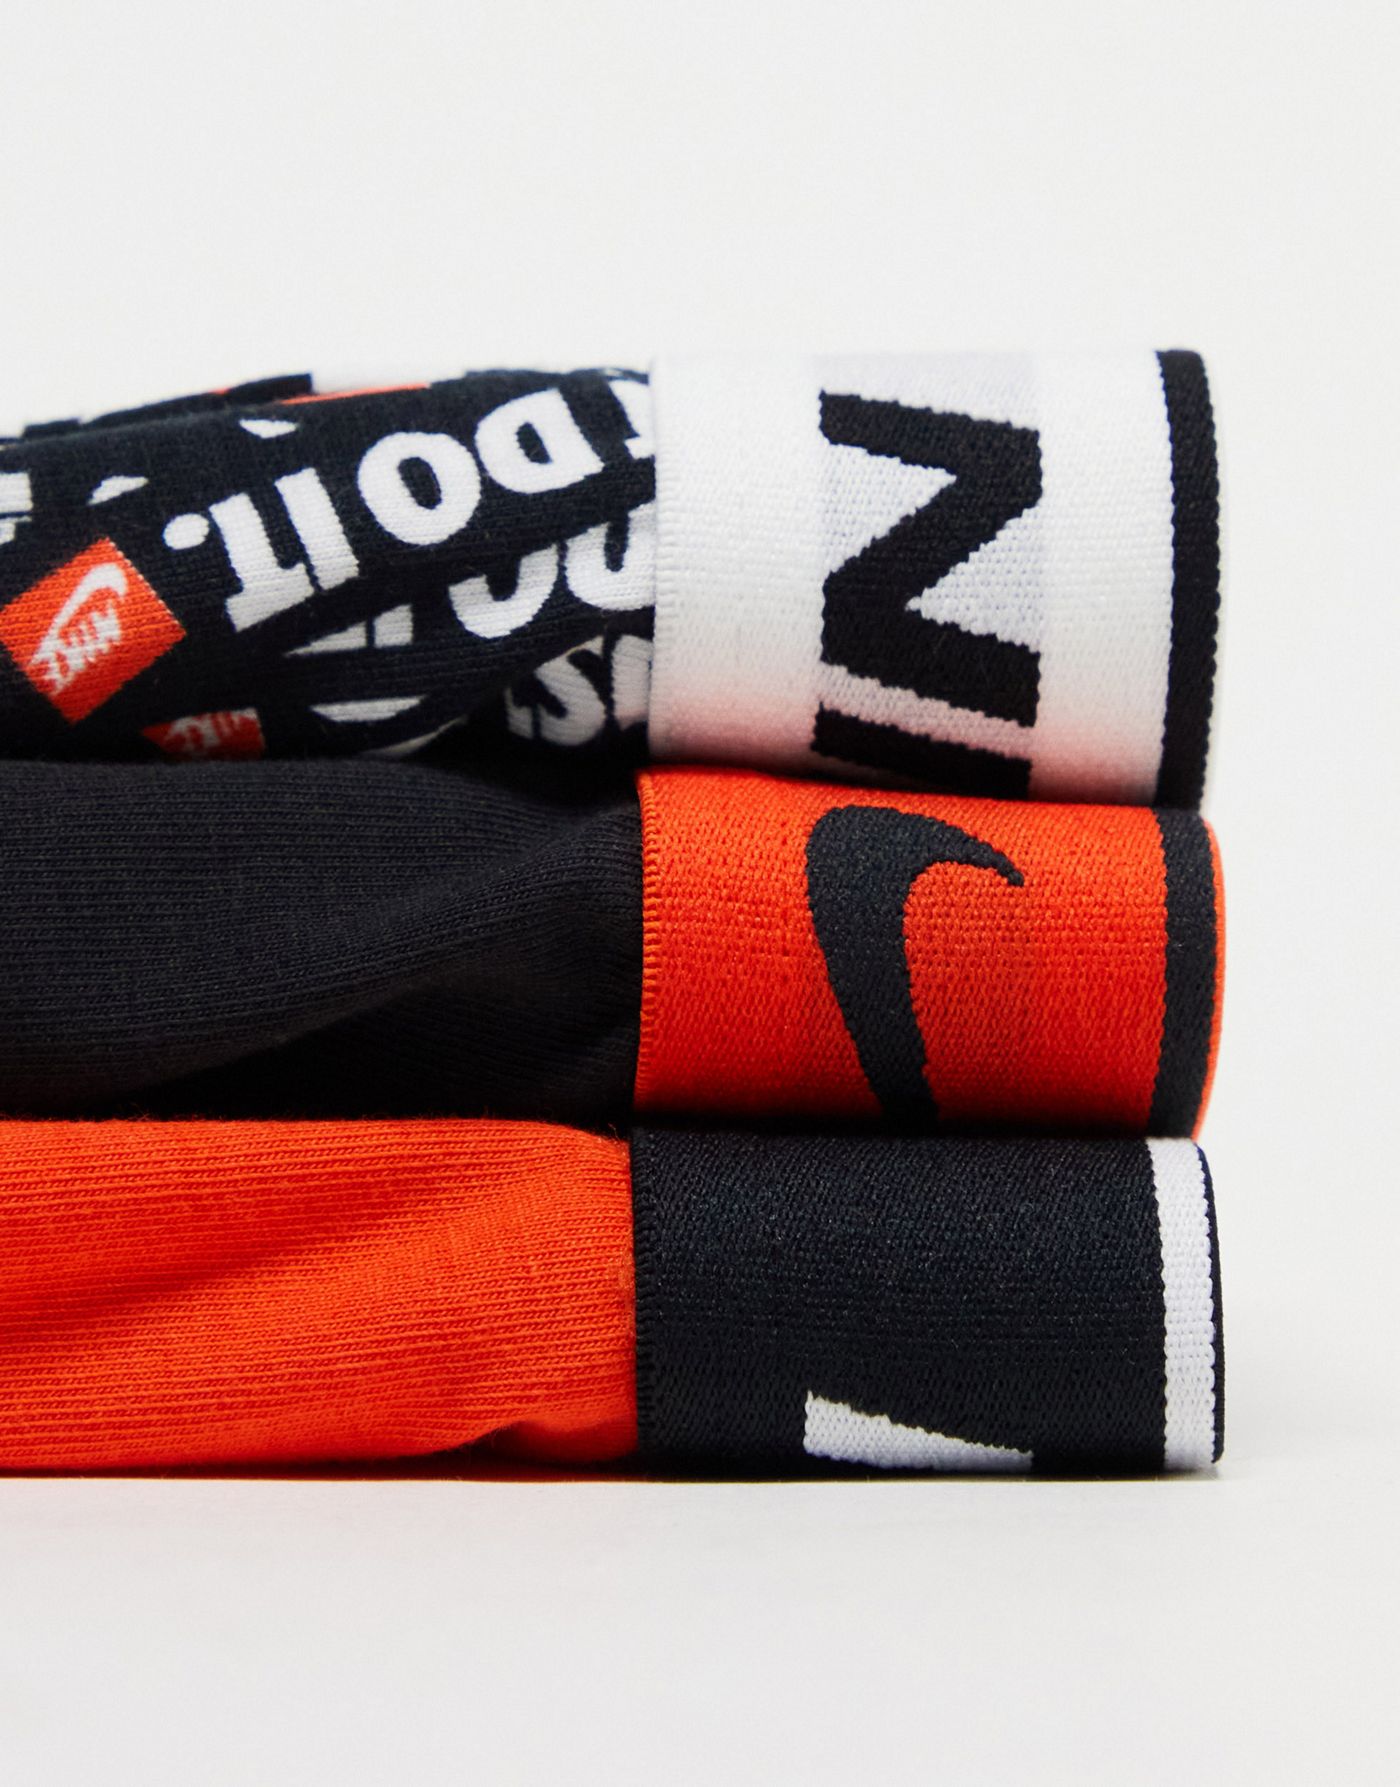 Nike Everyday Cotton Stretch trunks 3 pack in black/orange